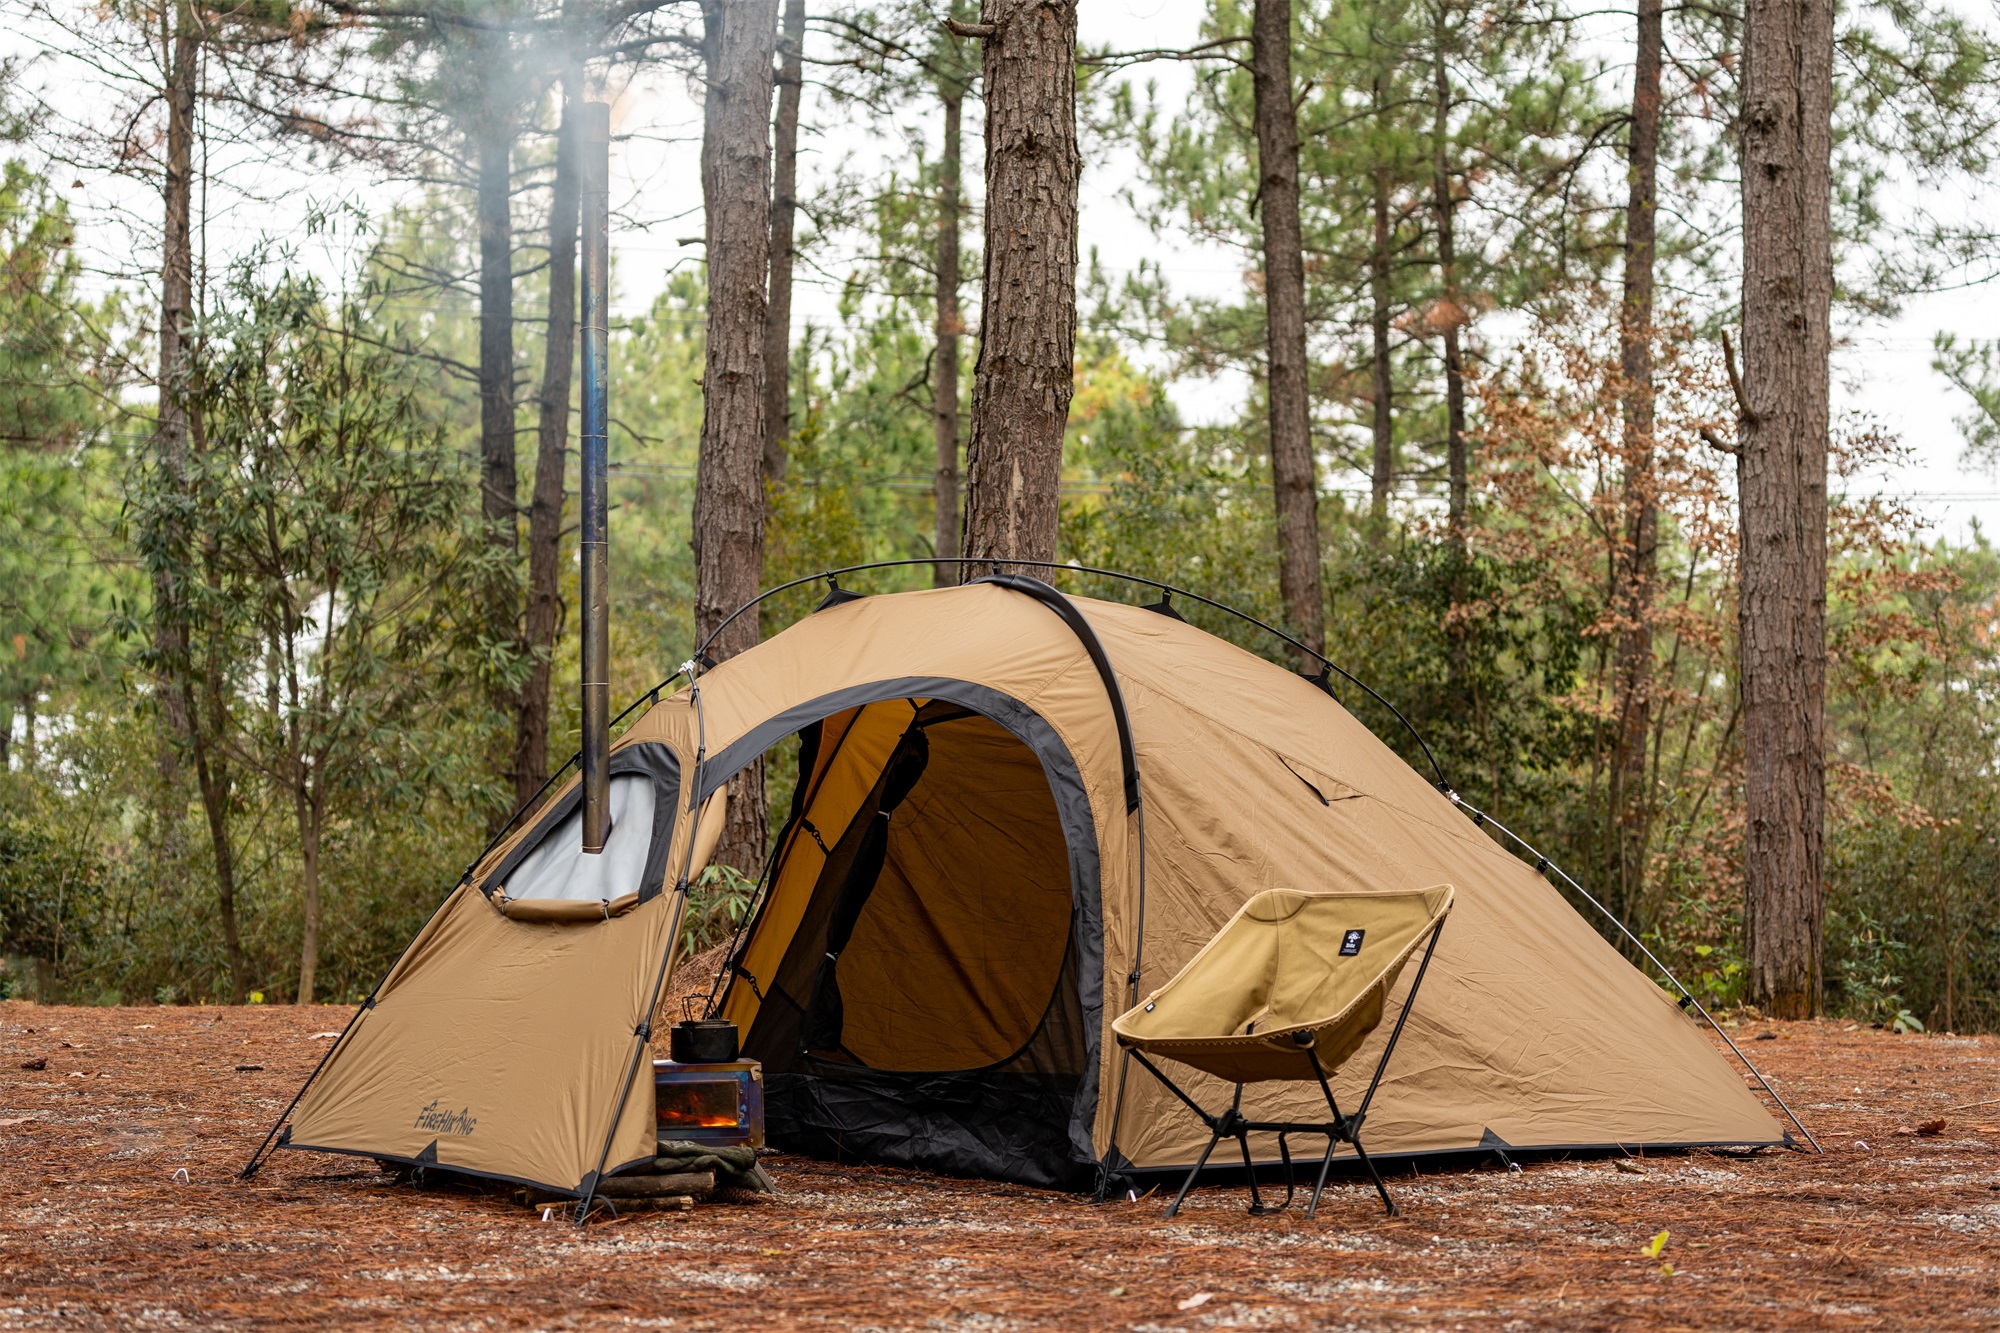 Fireden portable tent with inner tent and stove jack